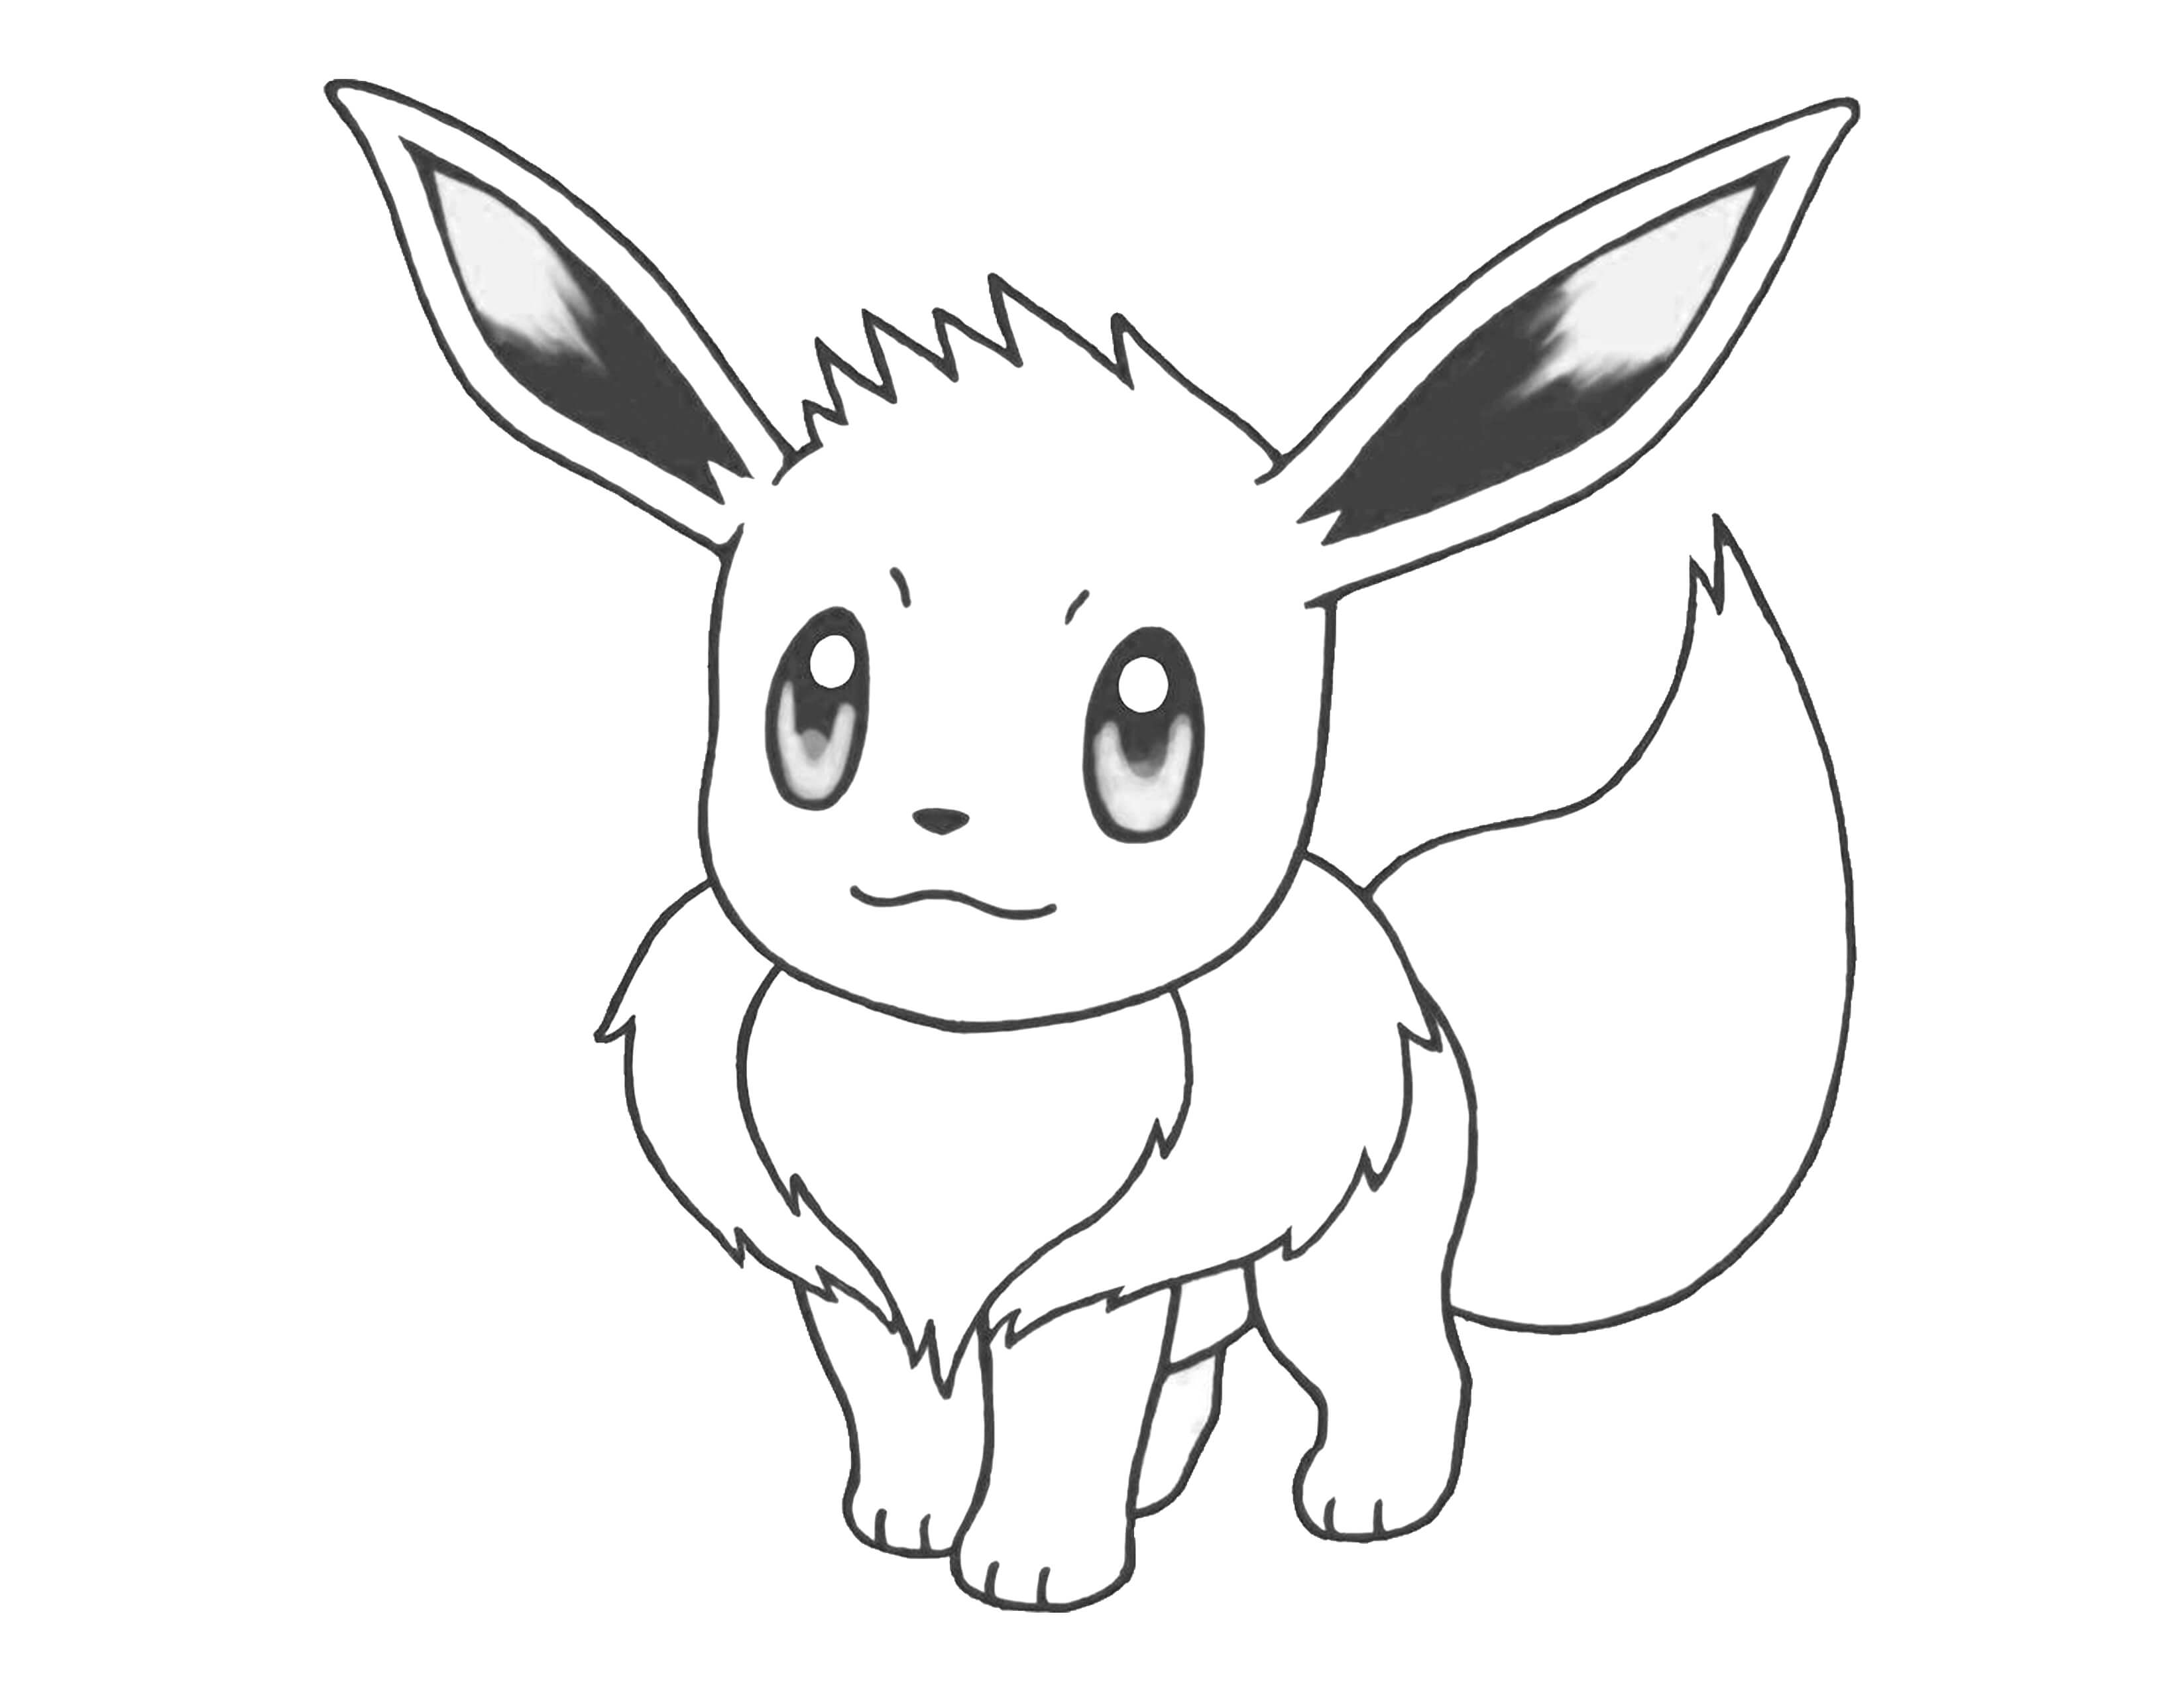 Eevee coloring pages to download and print for free